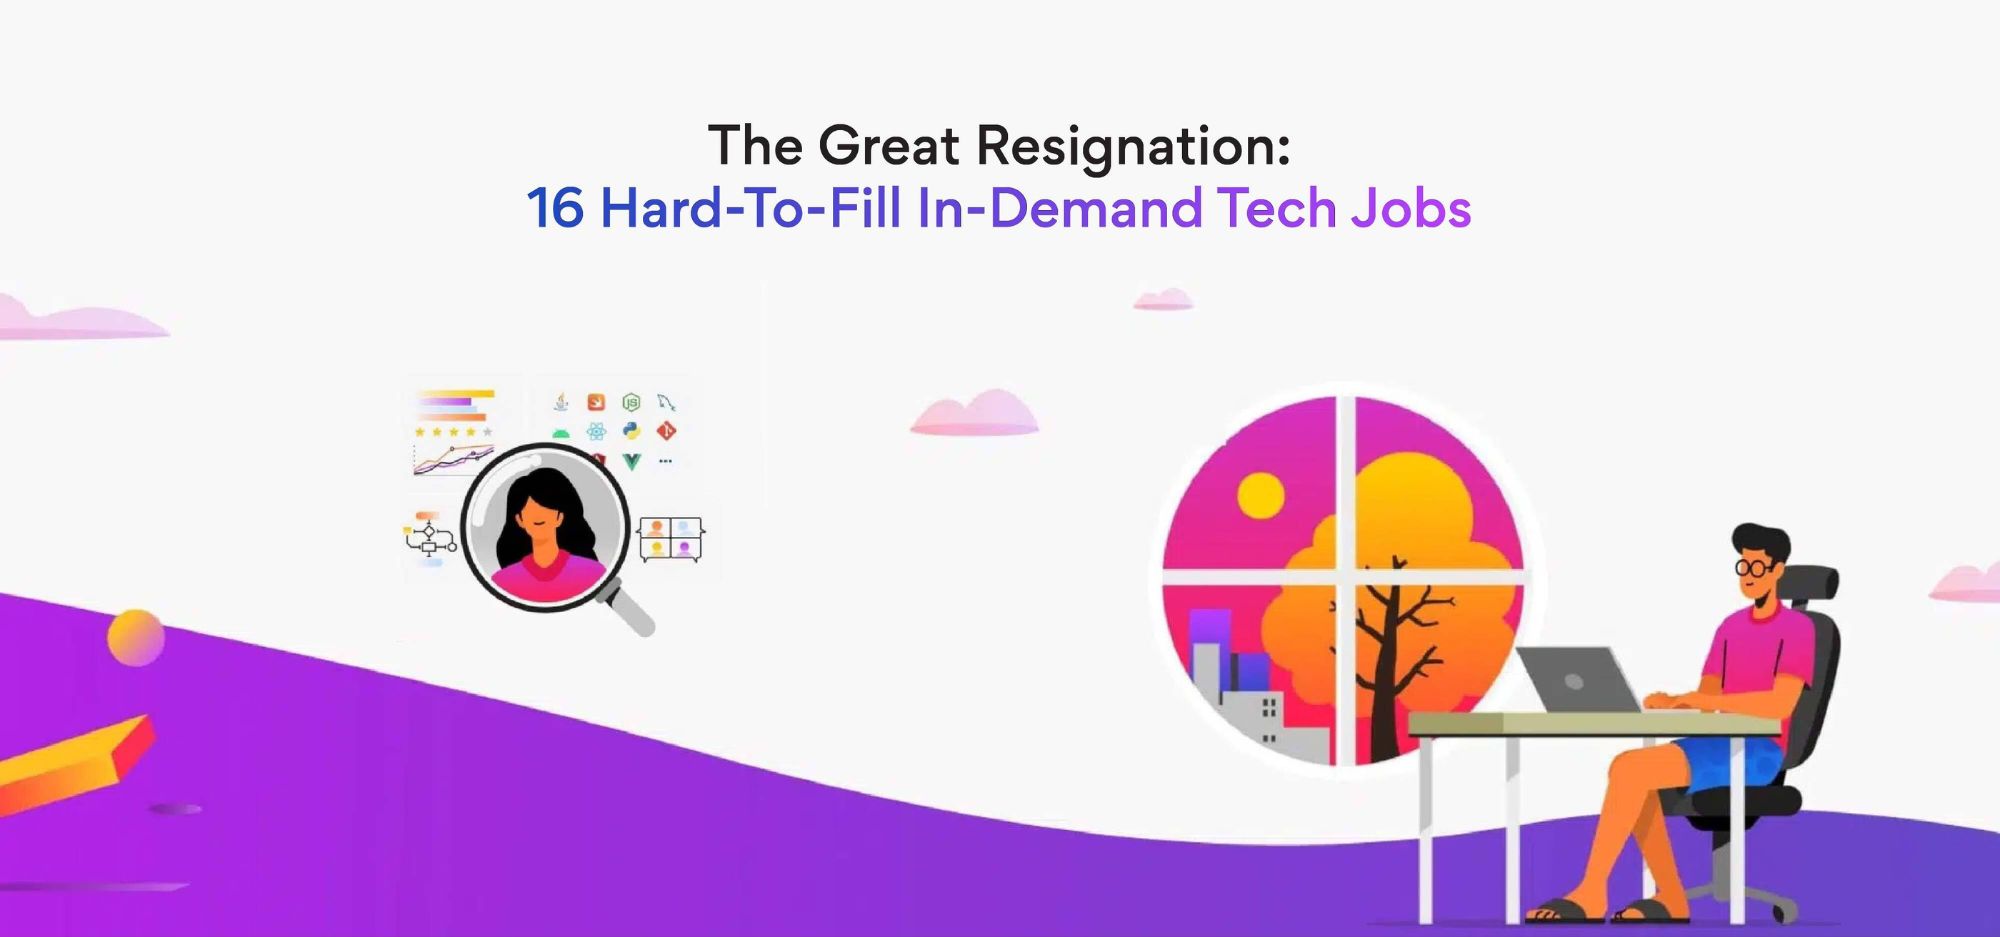 Great resignation hard to fill in-demand tech jobs